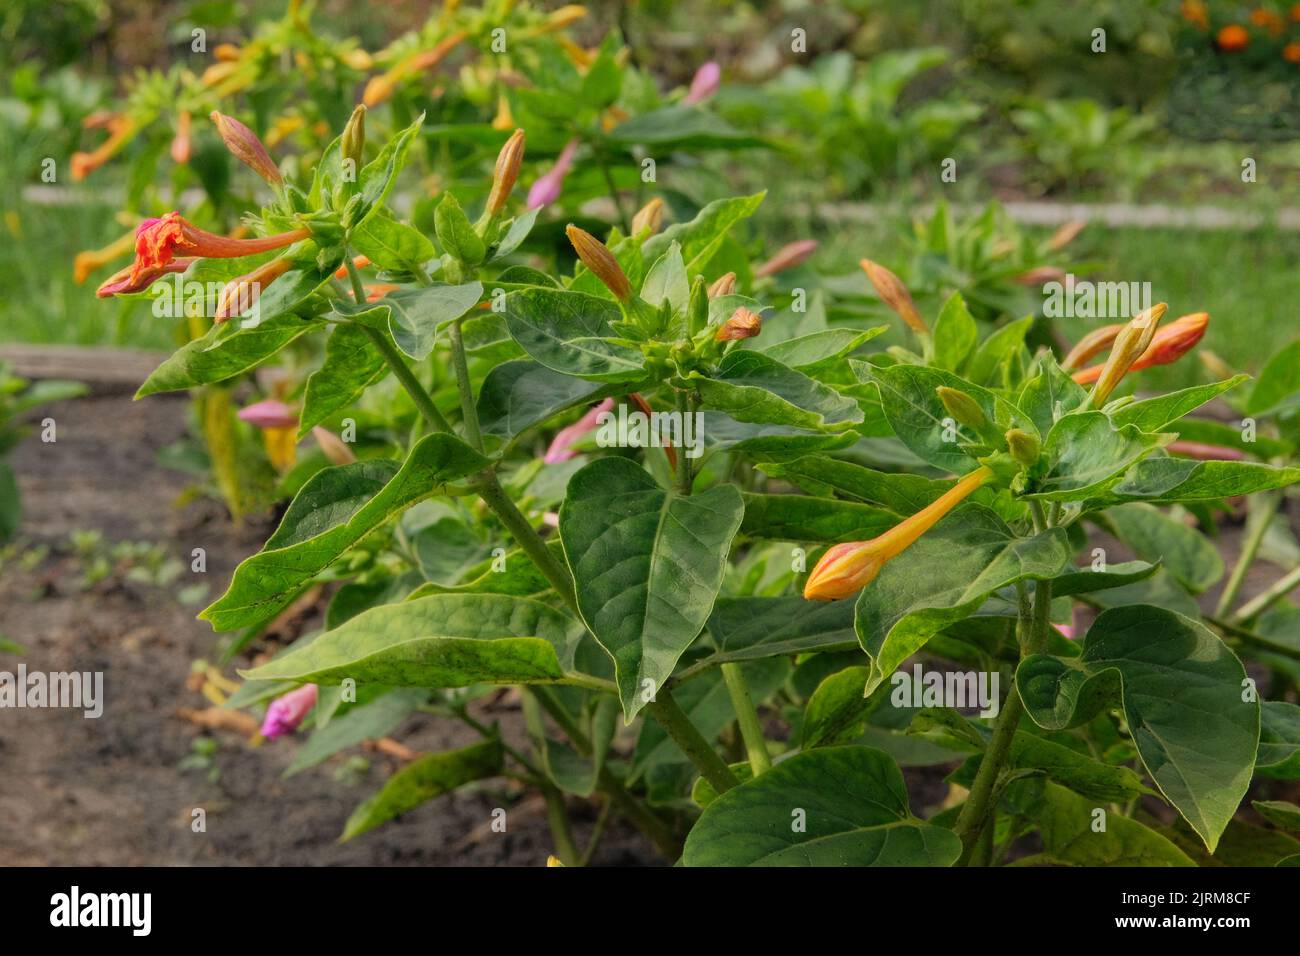 Flowers of pepper is growing in rural garden. Bed in the garden. Farming background. Pepper is blooming. Stock Photo